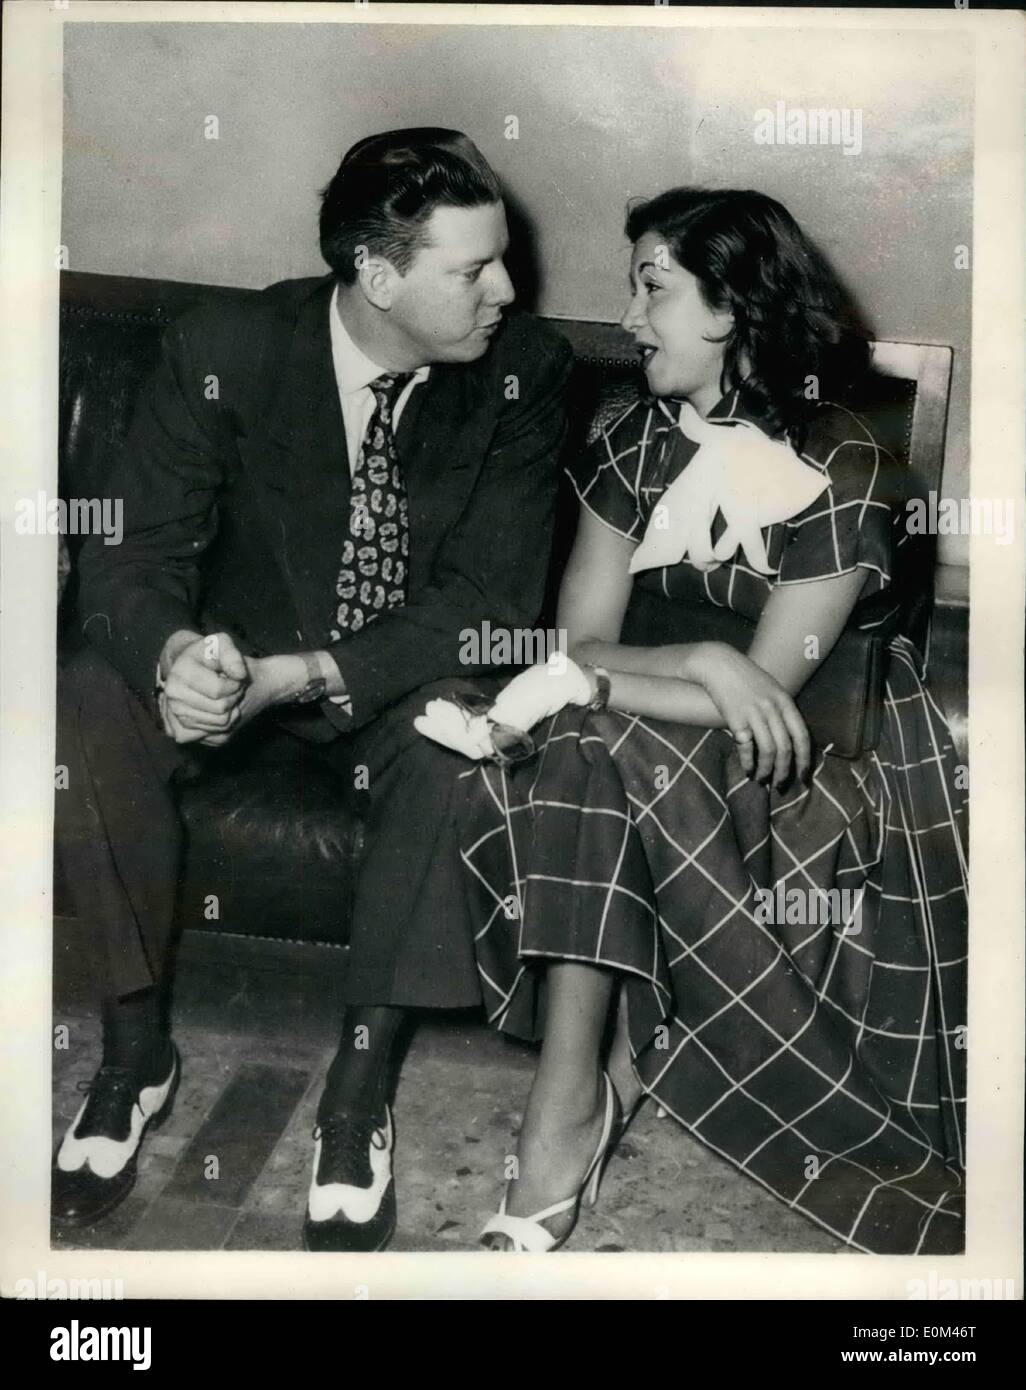 Jun. 08, 1953 - Sheppard King III get reconciliation Sheppard Abdullah King  millionaire, who changed his named to  honour of his wedding to Egyptian dan Gamal, arrived in Cairo to Egyptian danc a reconciliation with his wife. He left by immediately after succeeding. Photo shows Sheppard King, seen with his wife, Samia, when they met in Cairo recently. Stock Photo